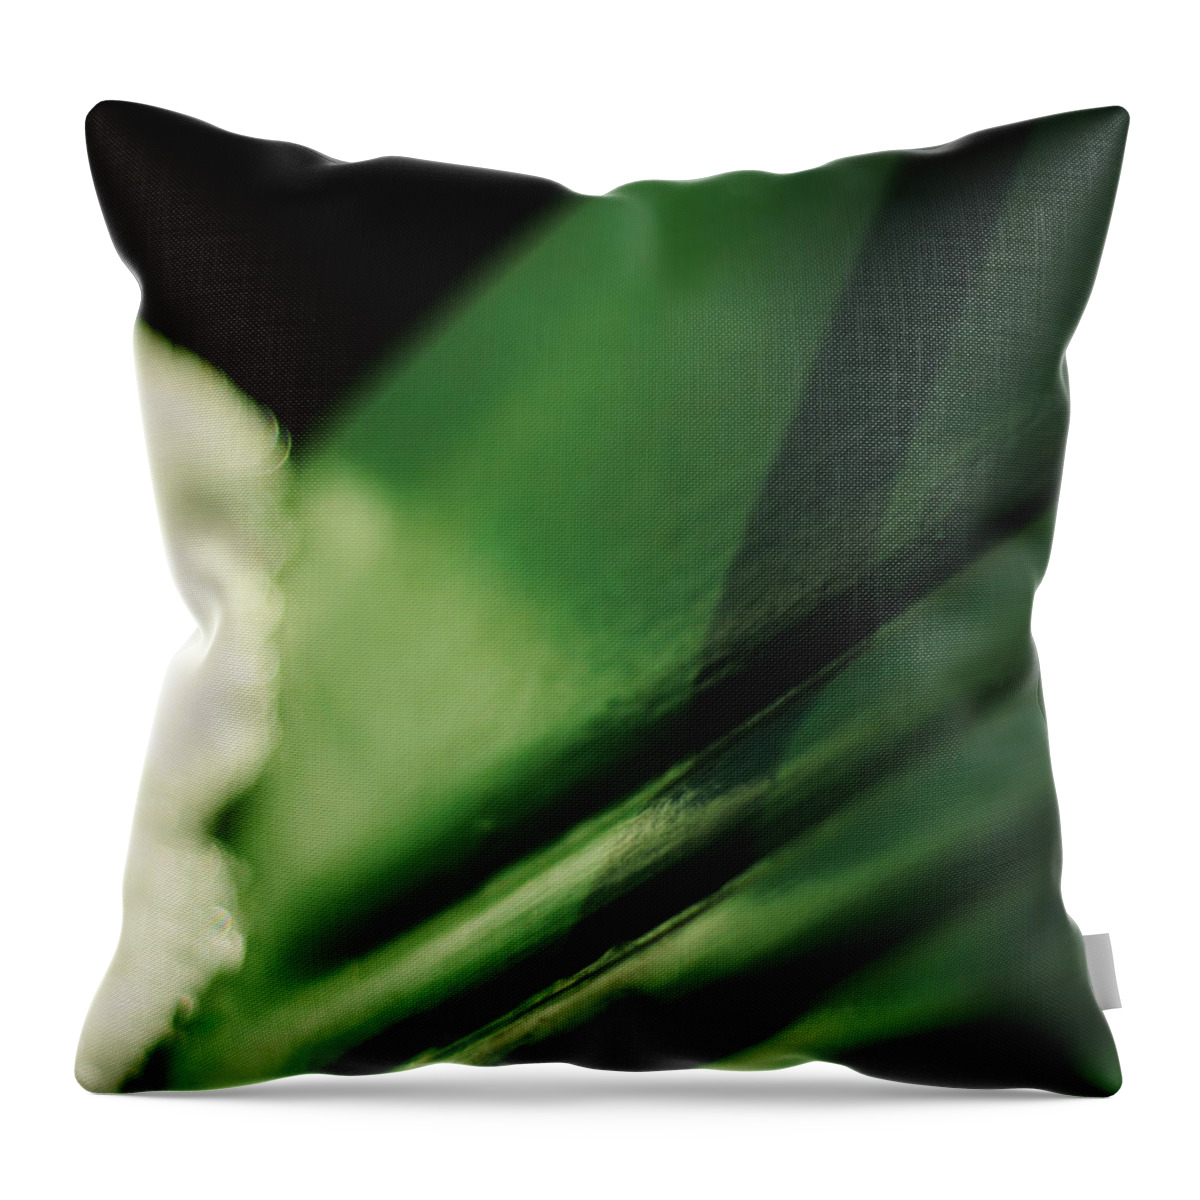 Green Throw Pillow featuring the photograph The Green Chair by Rebecca Sherman